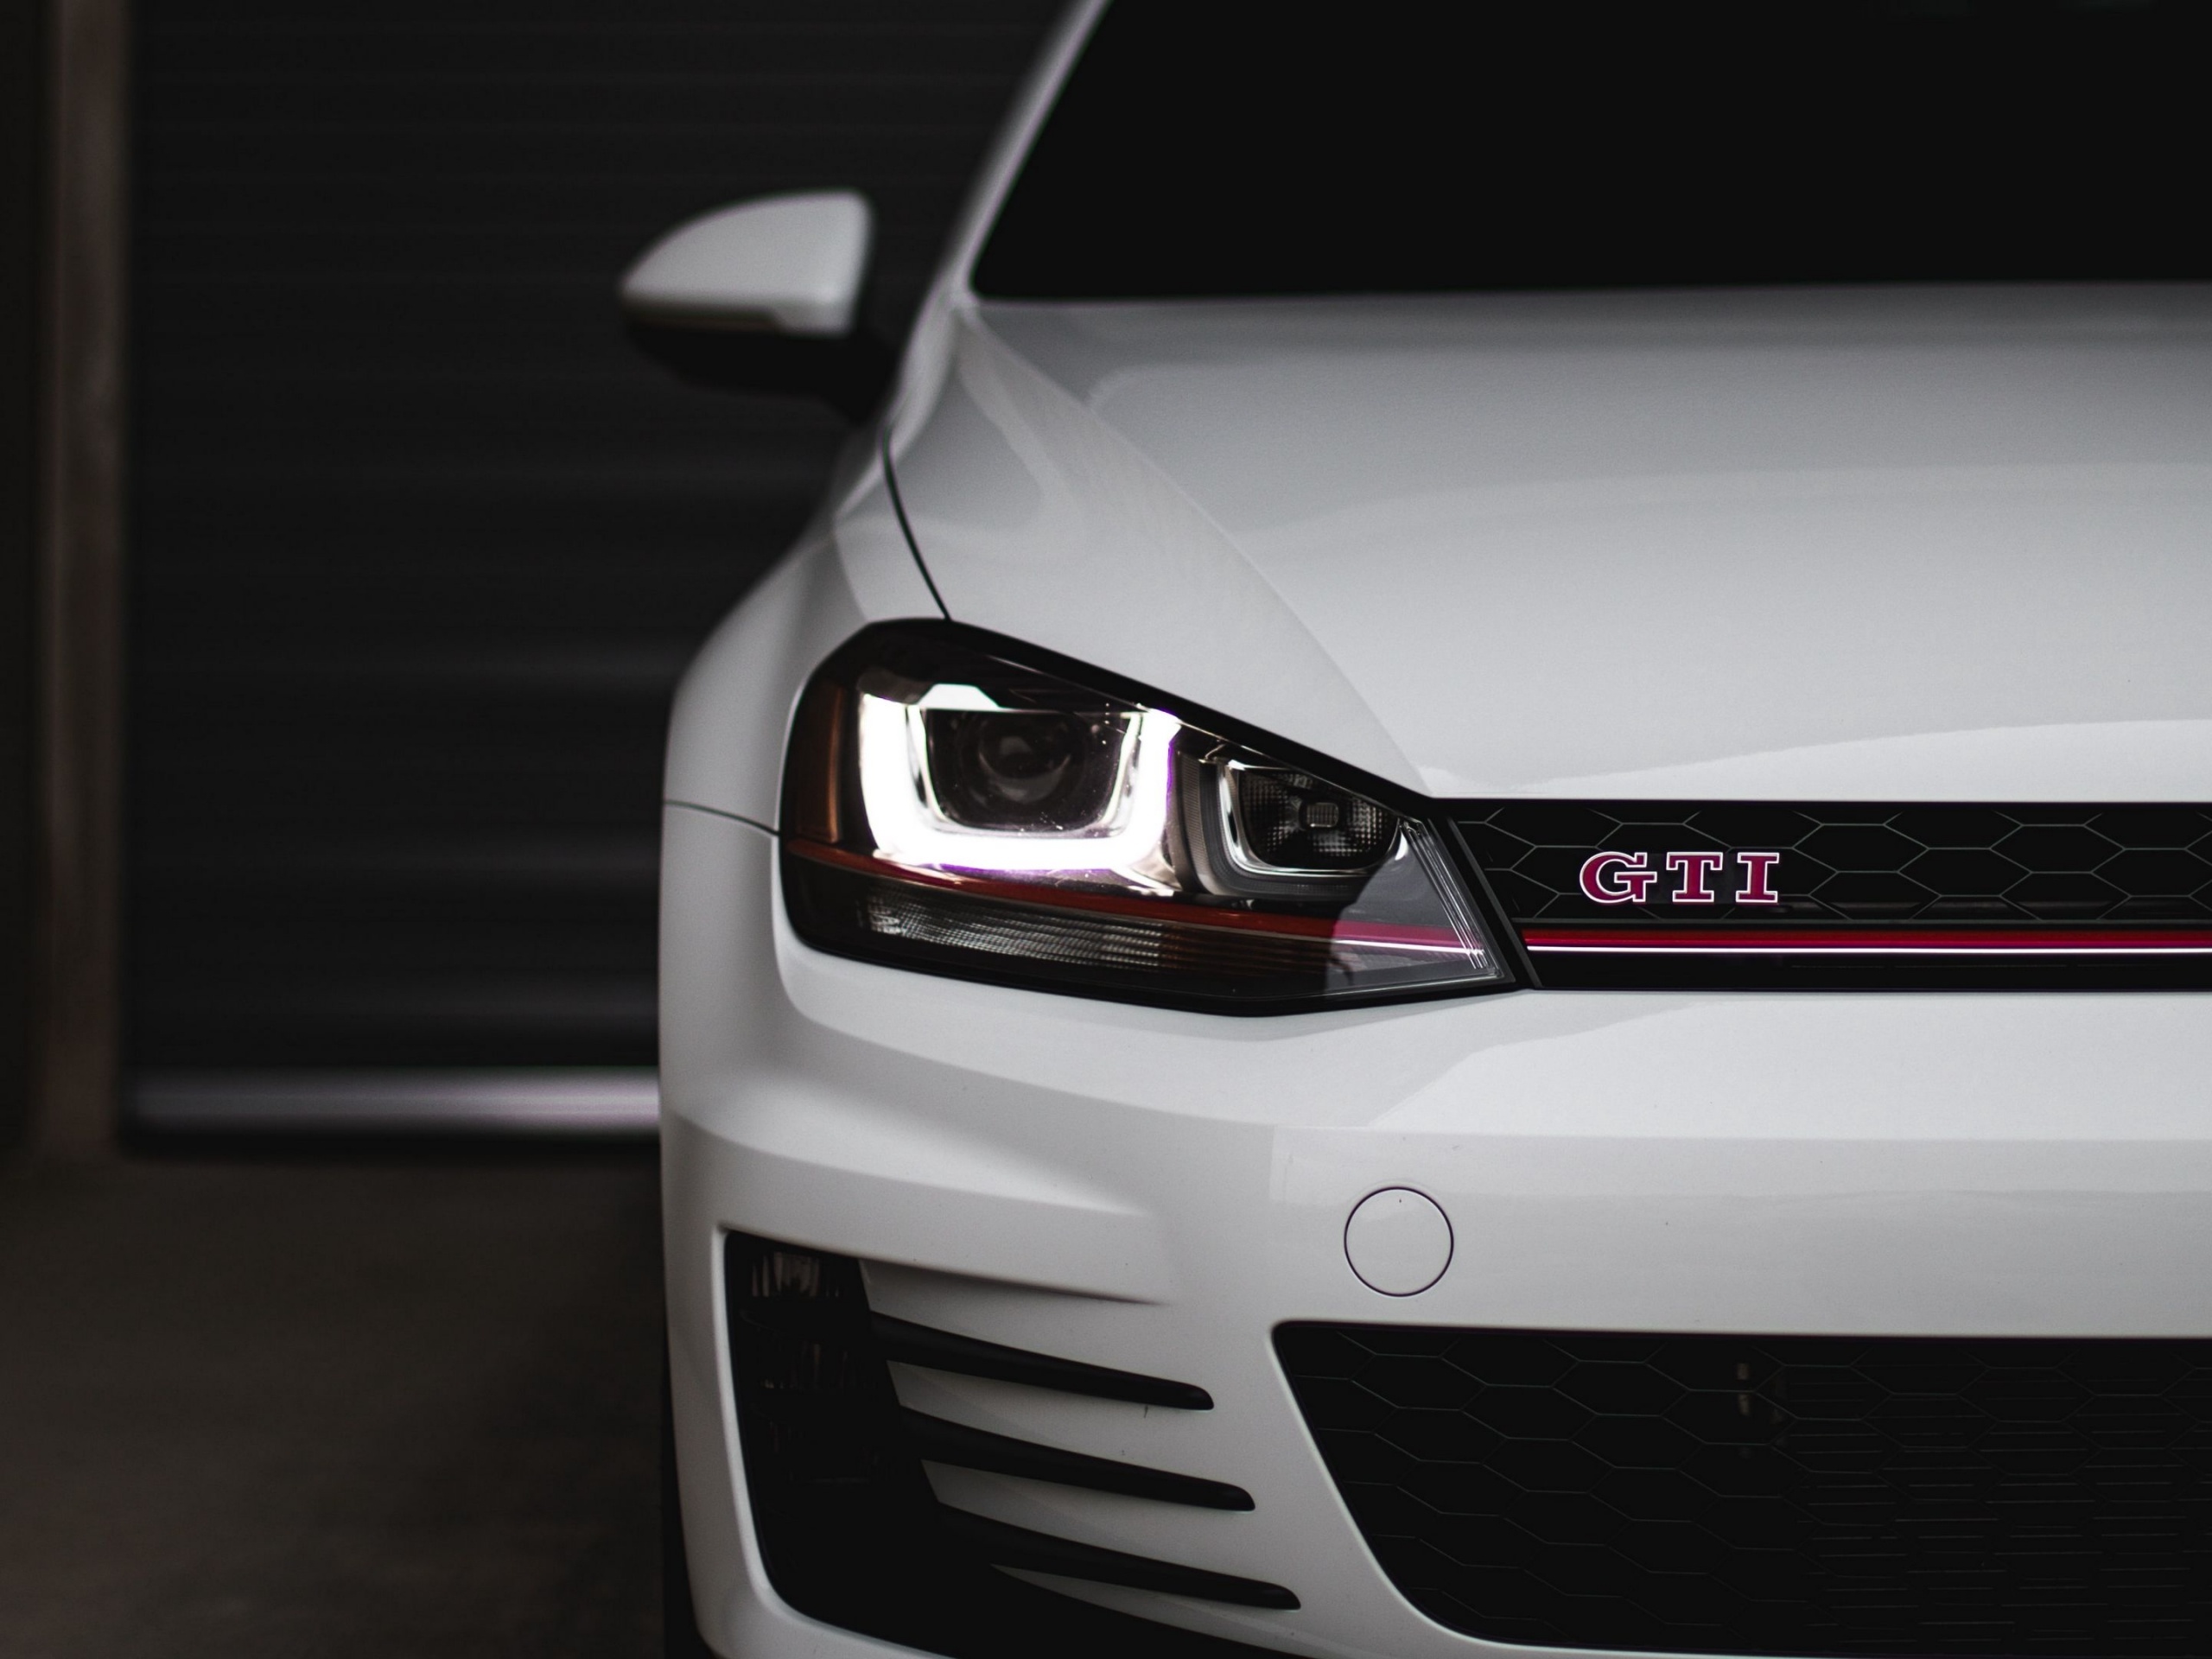 GTI car, Volkswagen Golf GTI, High-quality wallpapers, Automotive excellence, 2560x1920 HD Desktop